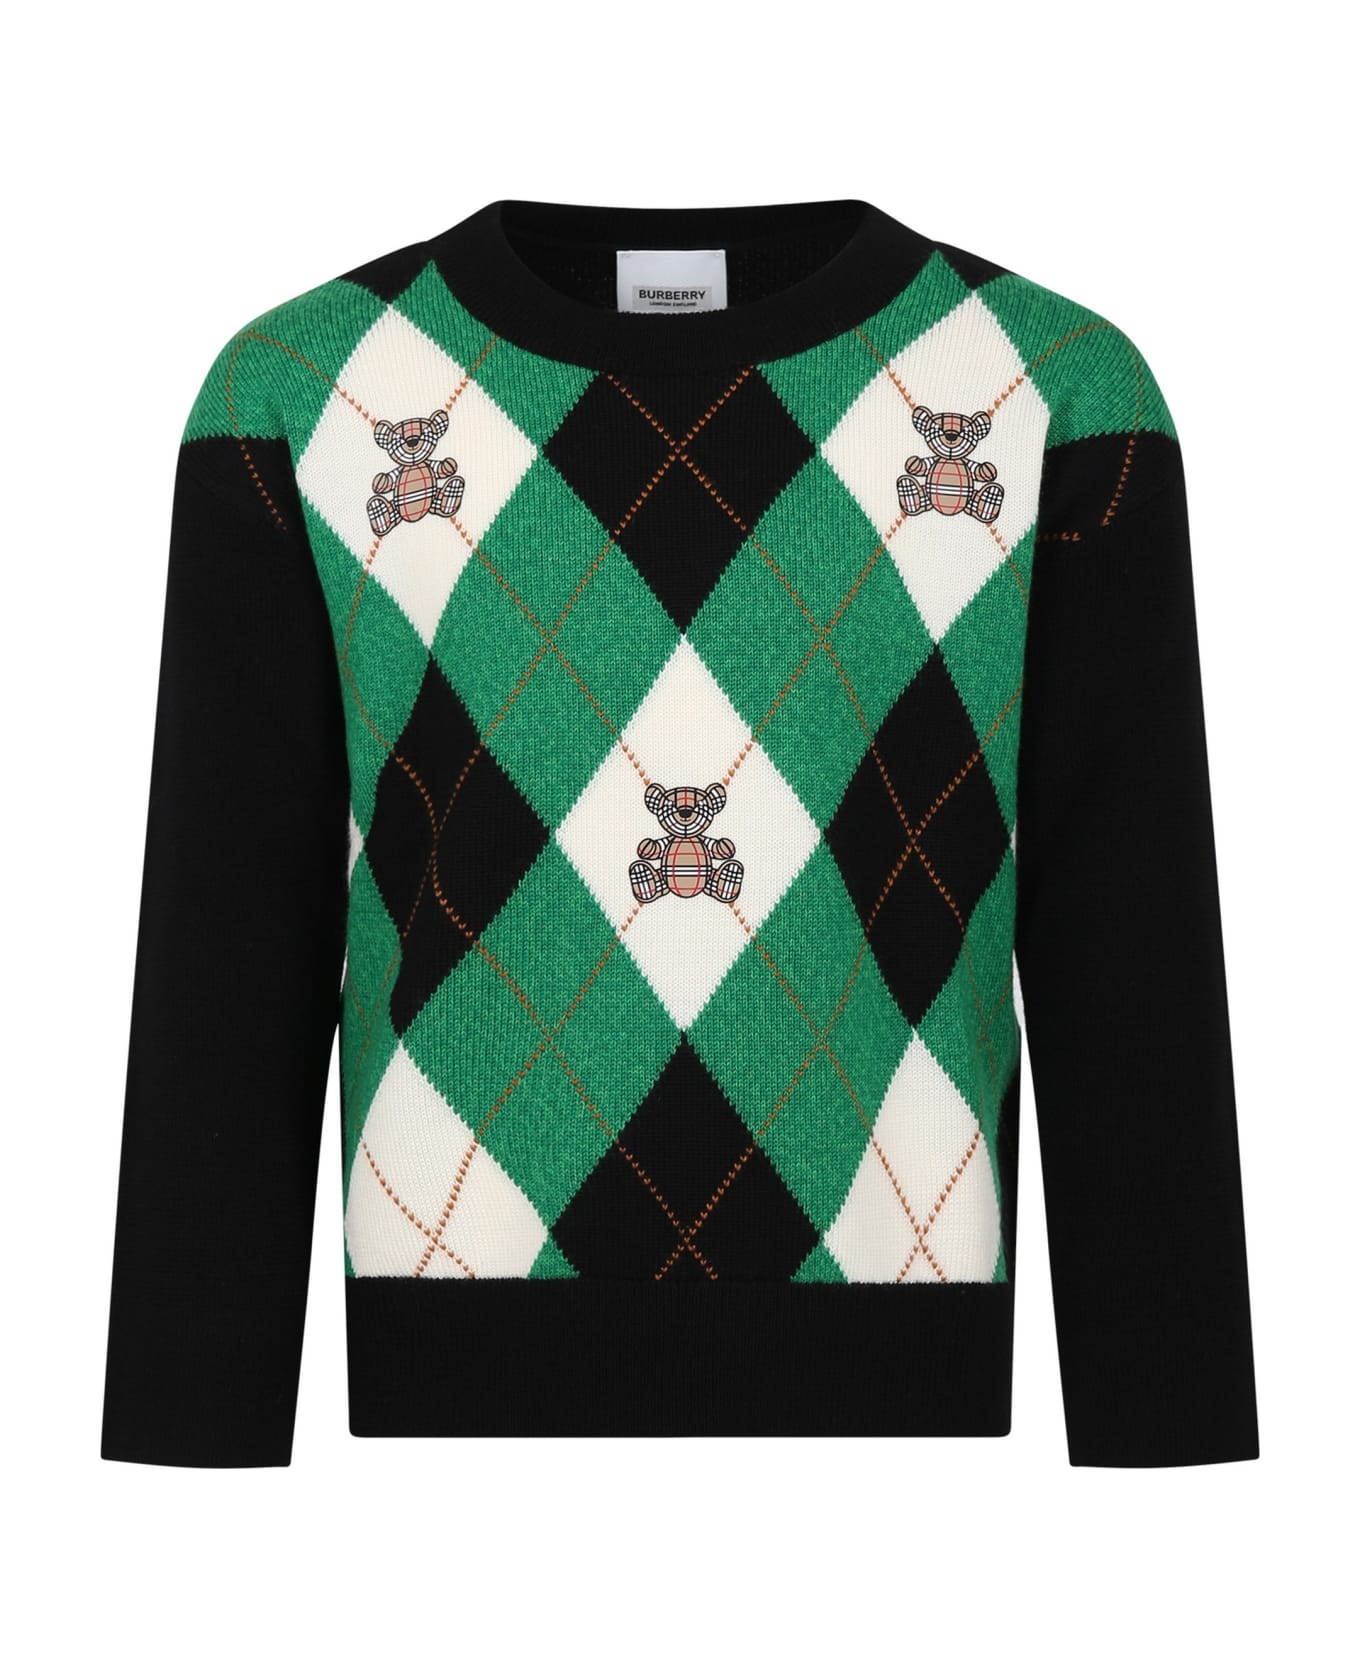 Burberry Black Sweater For Boy With Thomas Bear - Multicolor